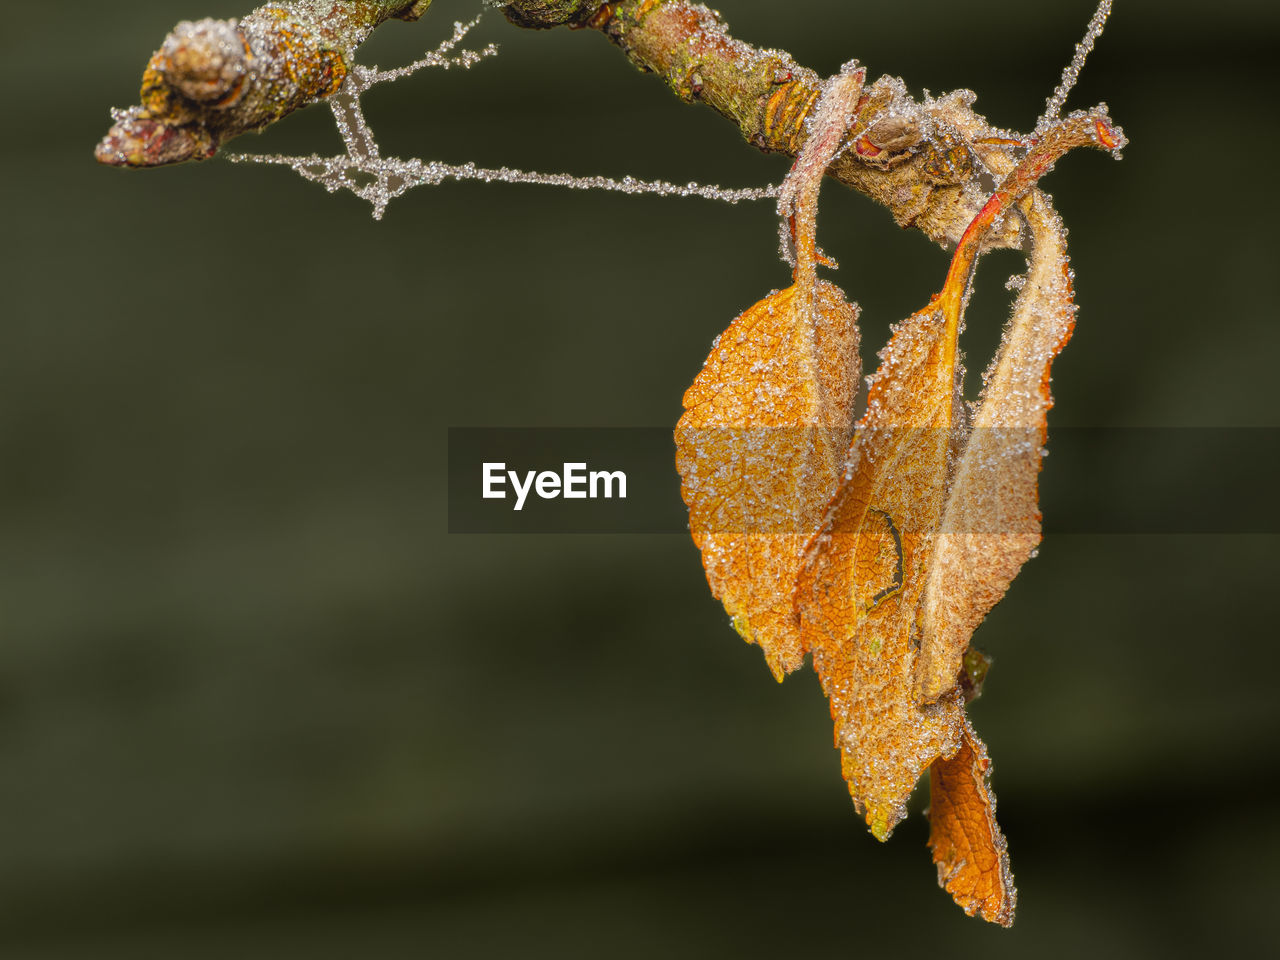 branch, leaf, macro photography, close-up, flower, plant, twig, nature, yellow, no people, autumn, focus on foreground, tree, plant stem, plant part, hanging, frost, outdoors, orange color, beauty in nature, dry